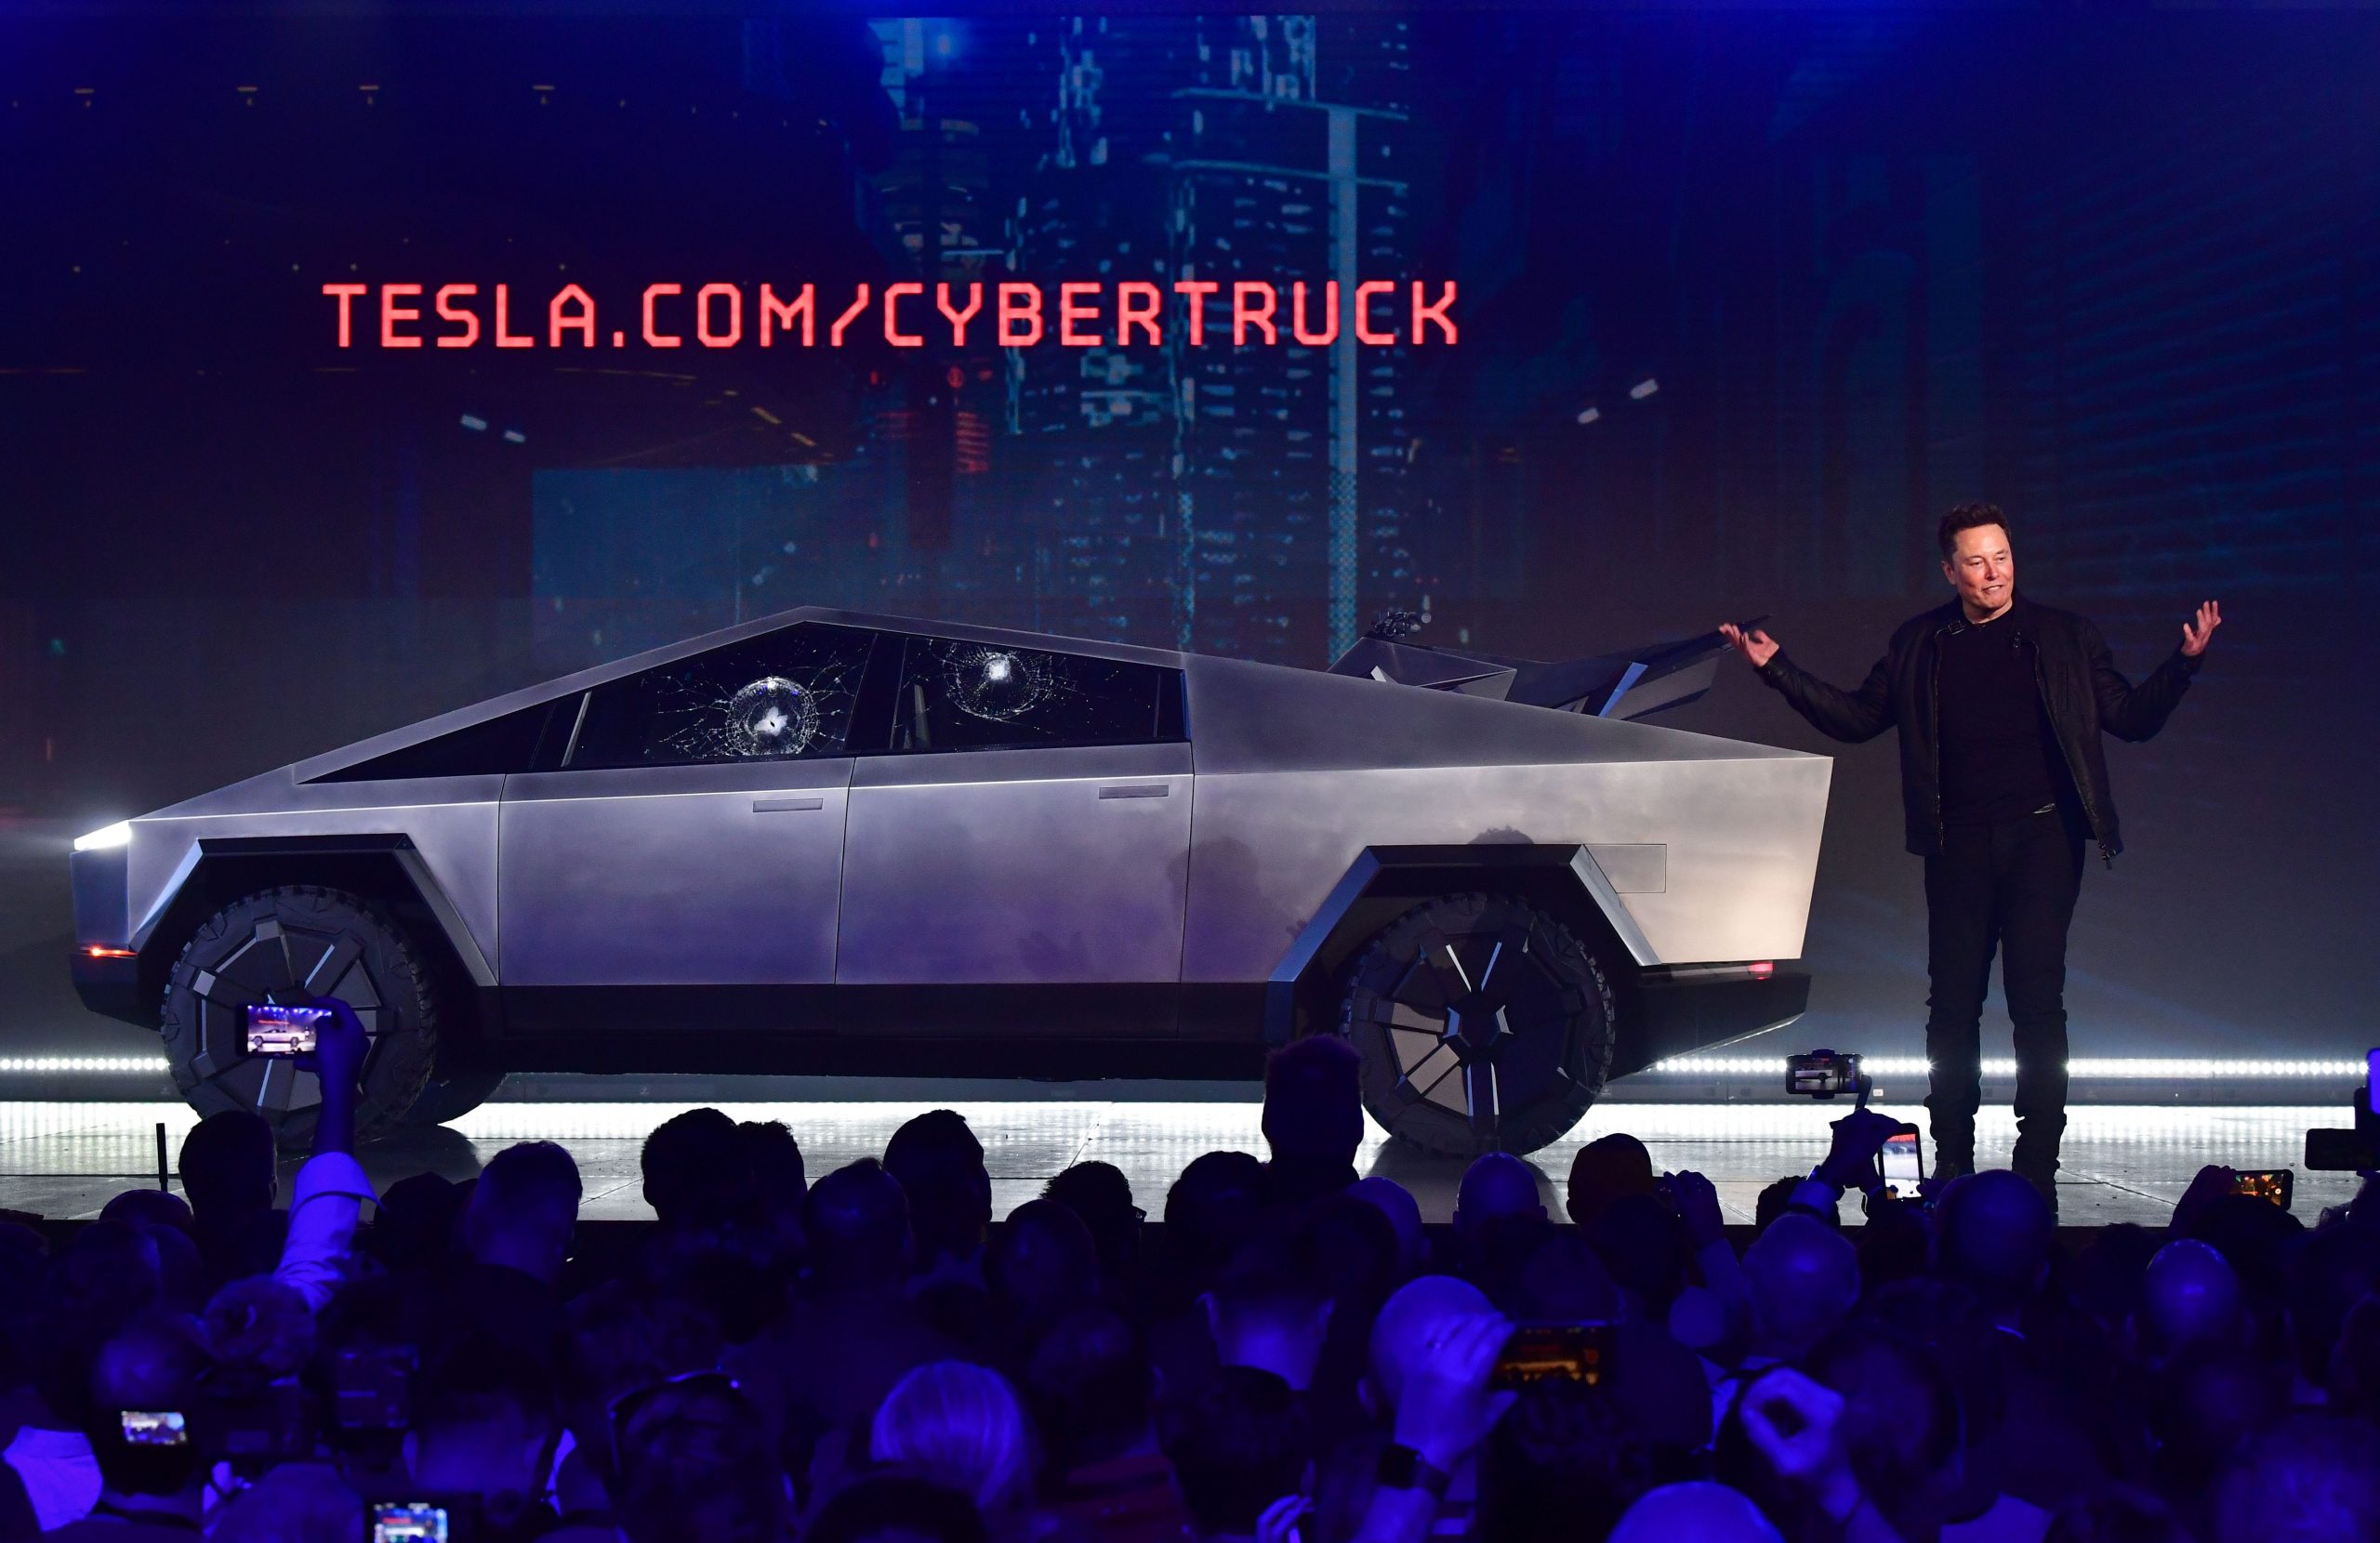 Tesla CEO Elon Musk speaks in front of the newly unveiled all-electric battery-powered Tesla's Cybertruck